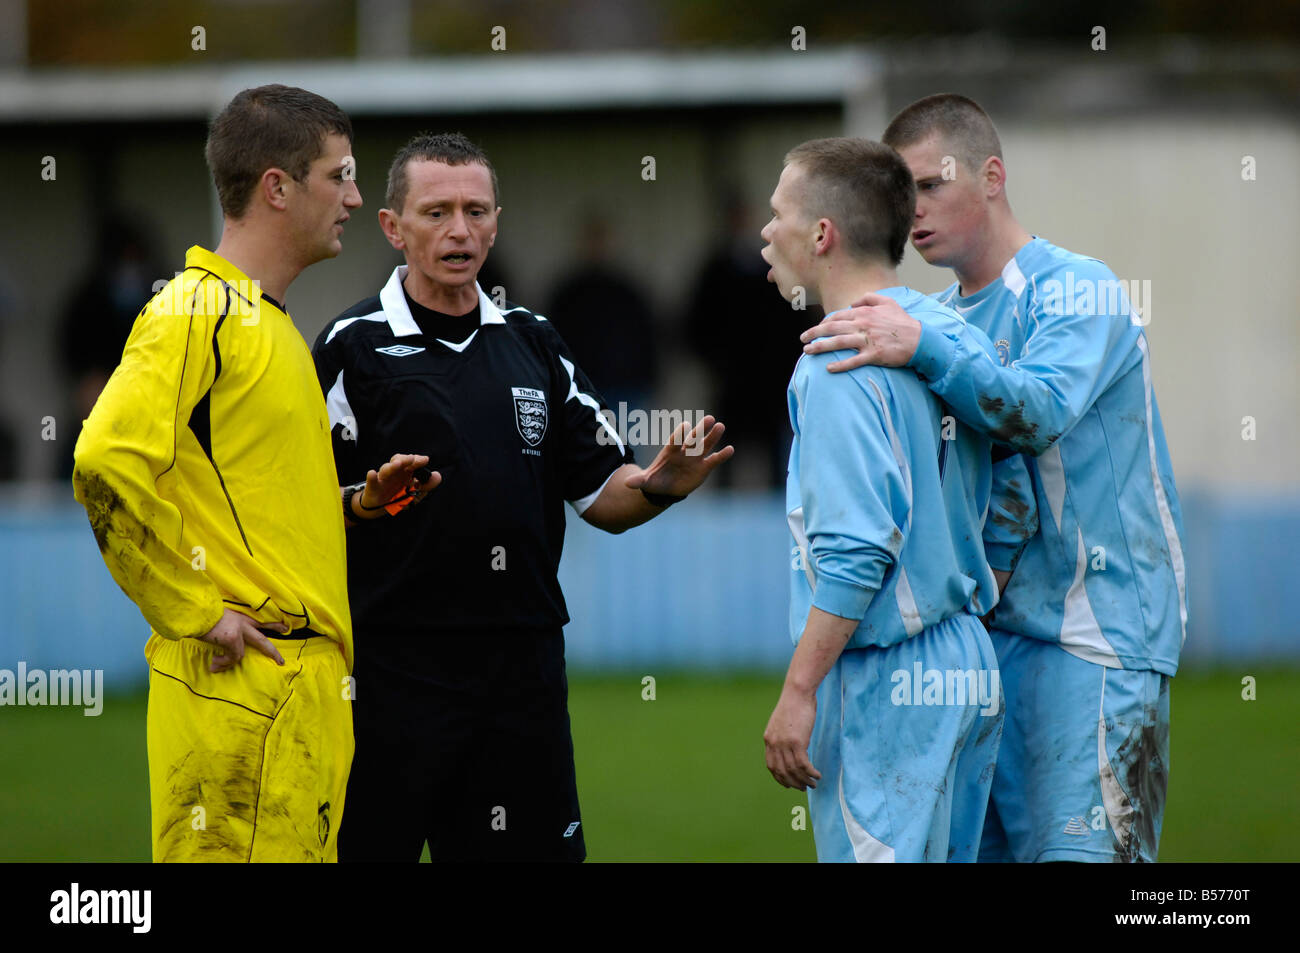 referee tries to calm down dispute between two opponents Stock Photo